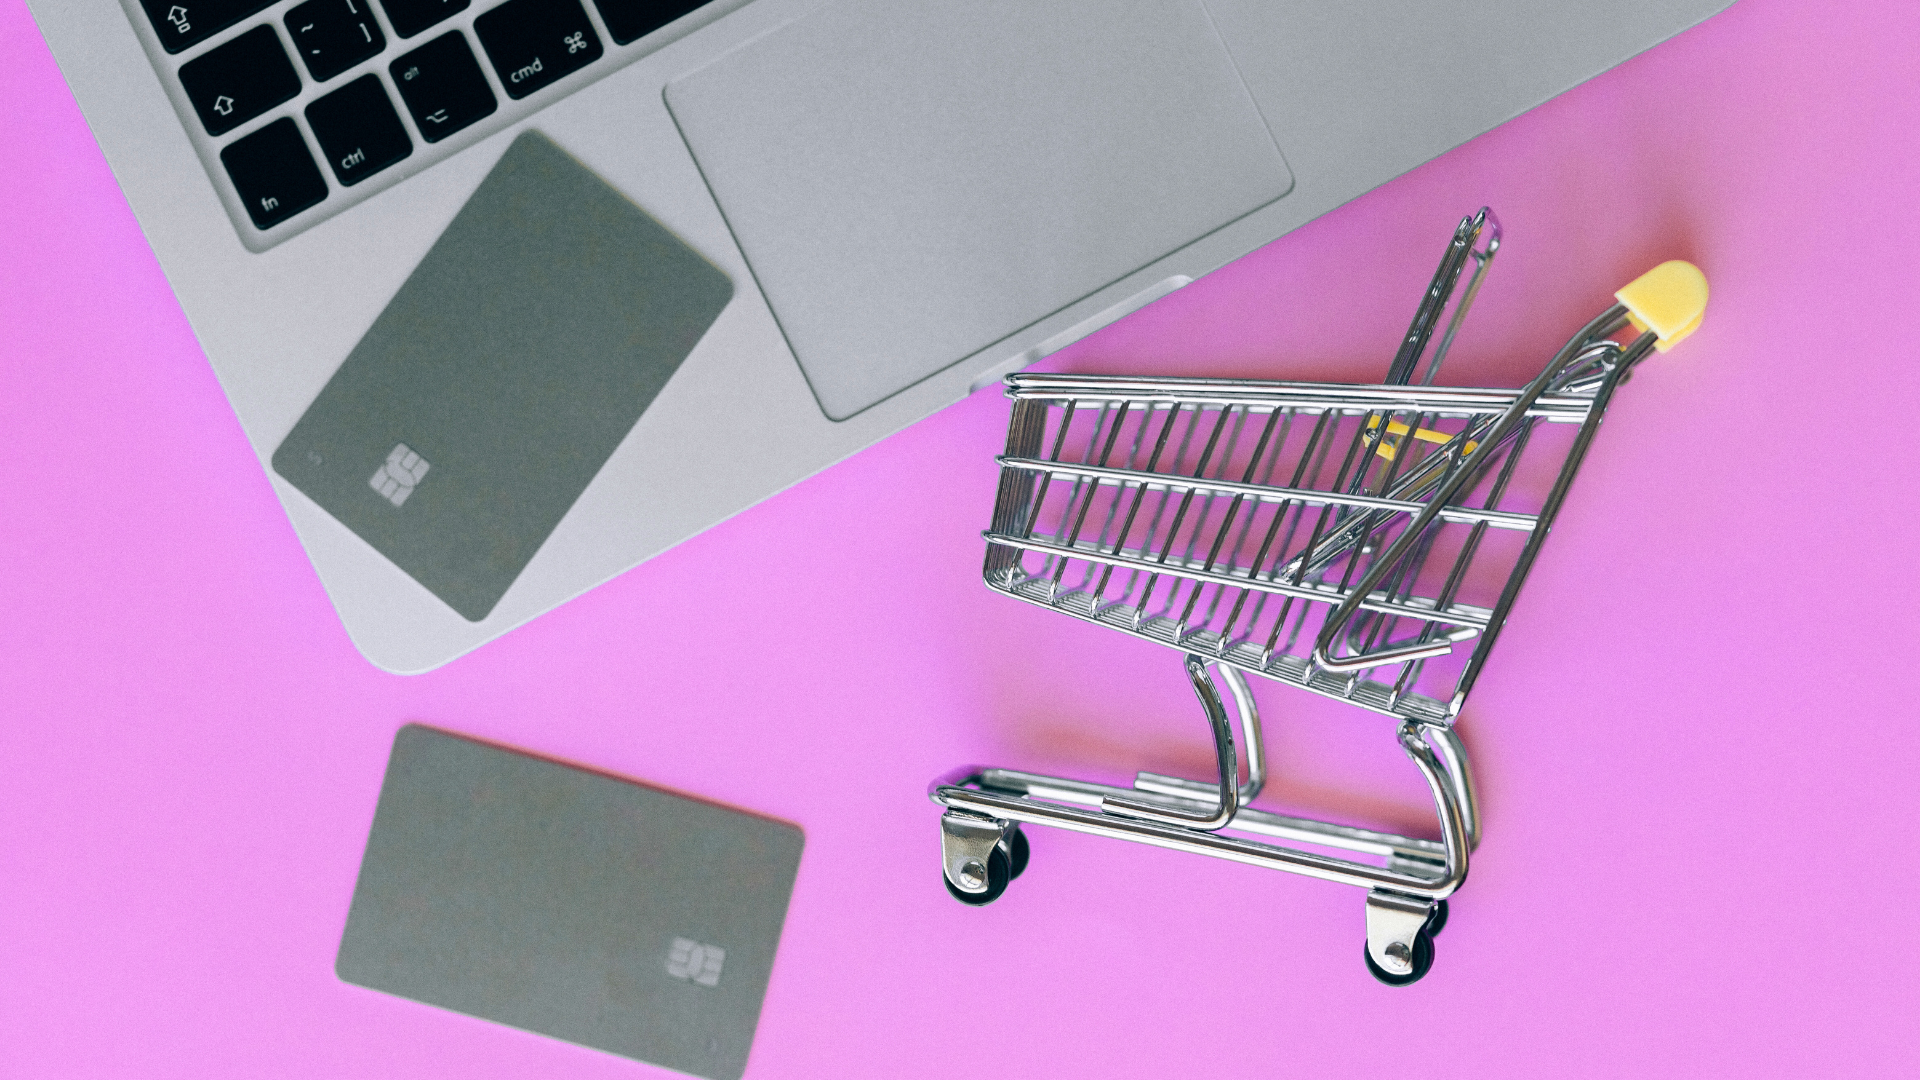 Silver shopping cart on pink surface with credit cards and laptop